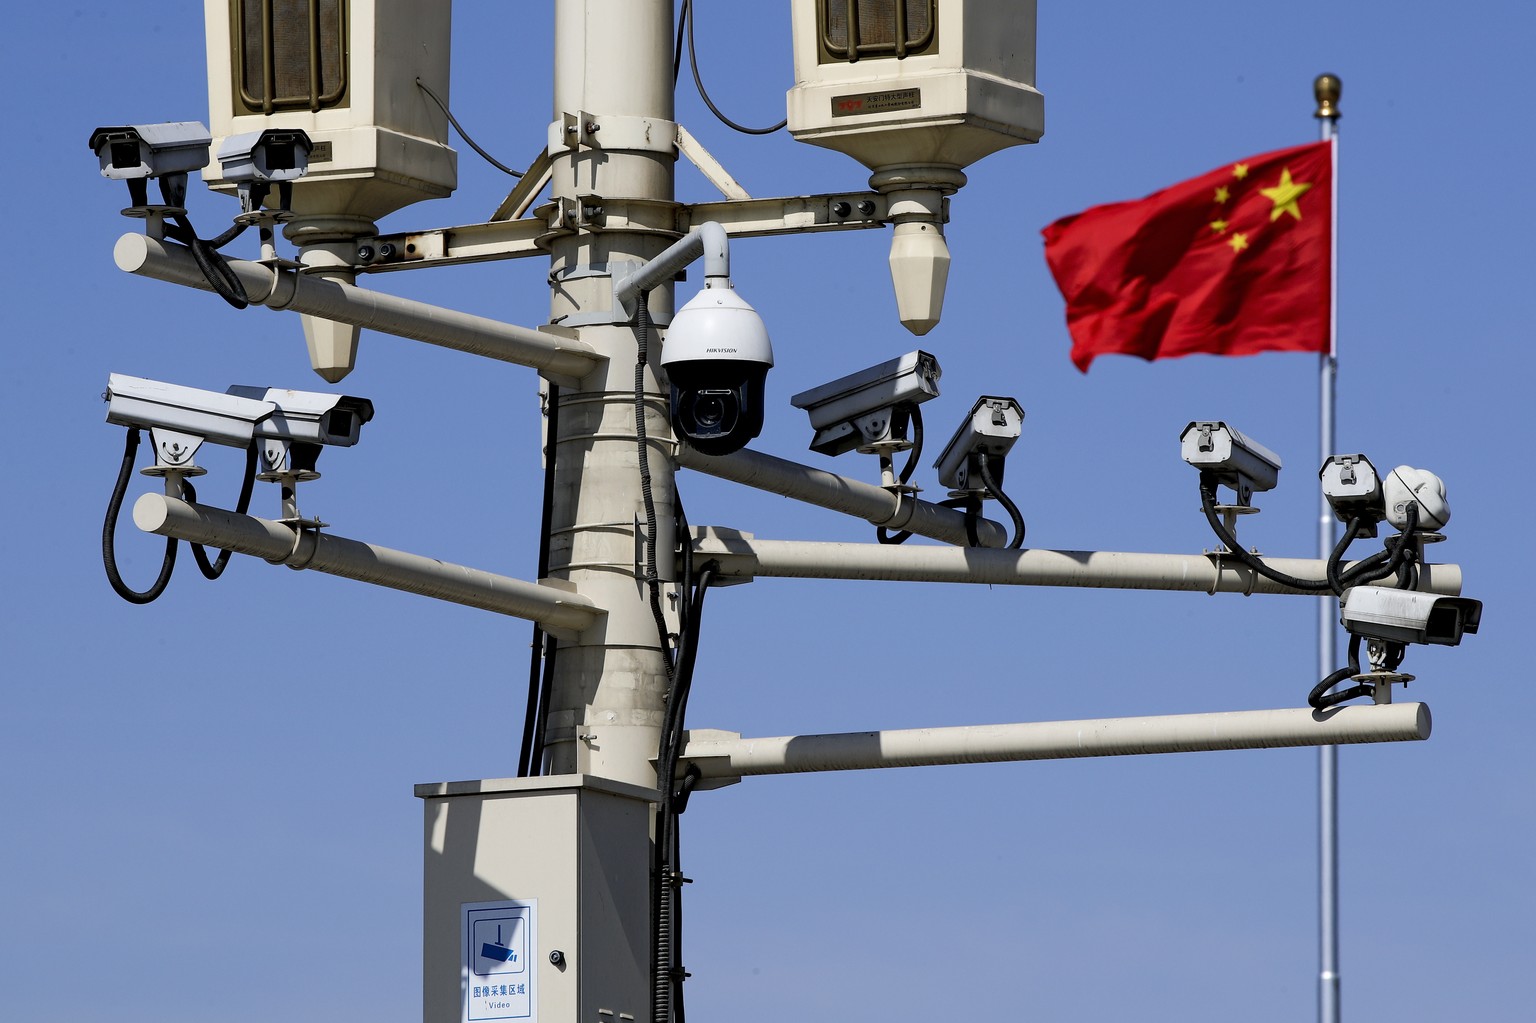 A Chinese national flag flutters near the surveillance cameras mounted on a lamp post in Tiananmen Square in Beijing, Friday, March 15, 2019. Chinese Premier Li Keqiang on Friday denied Beijing tells  ...